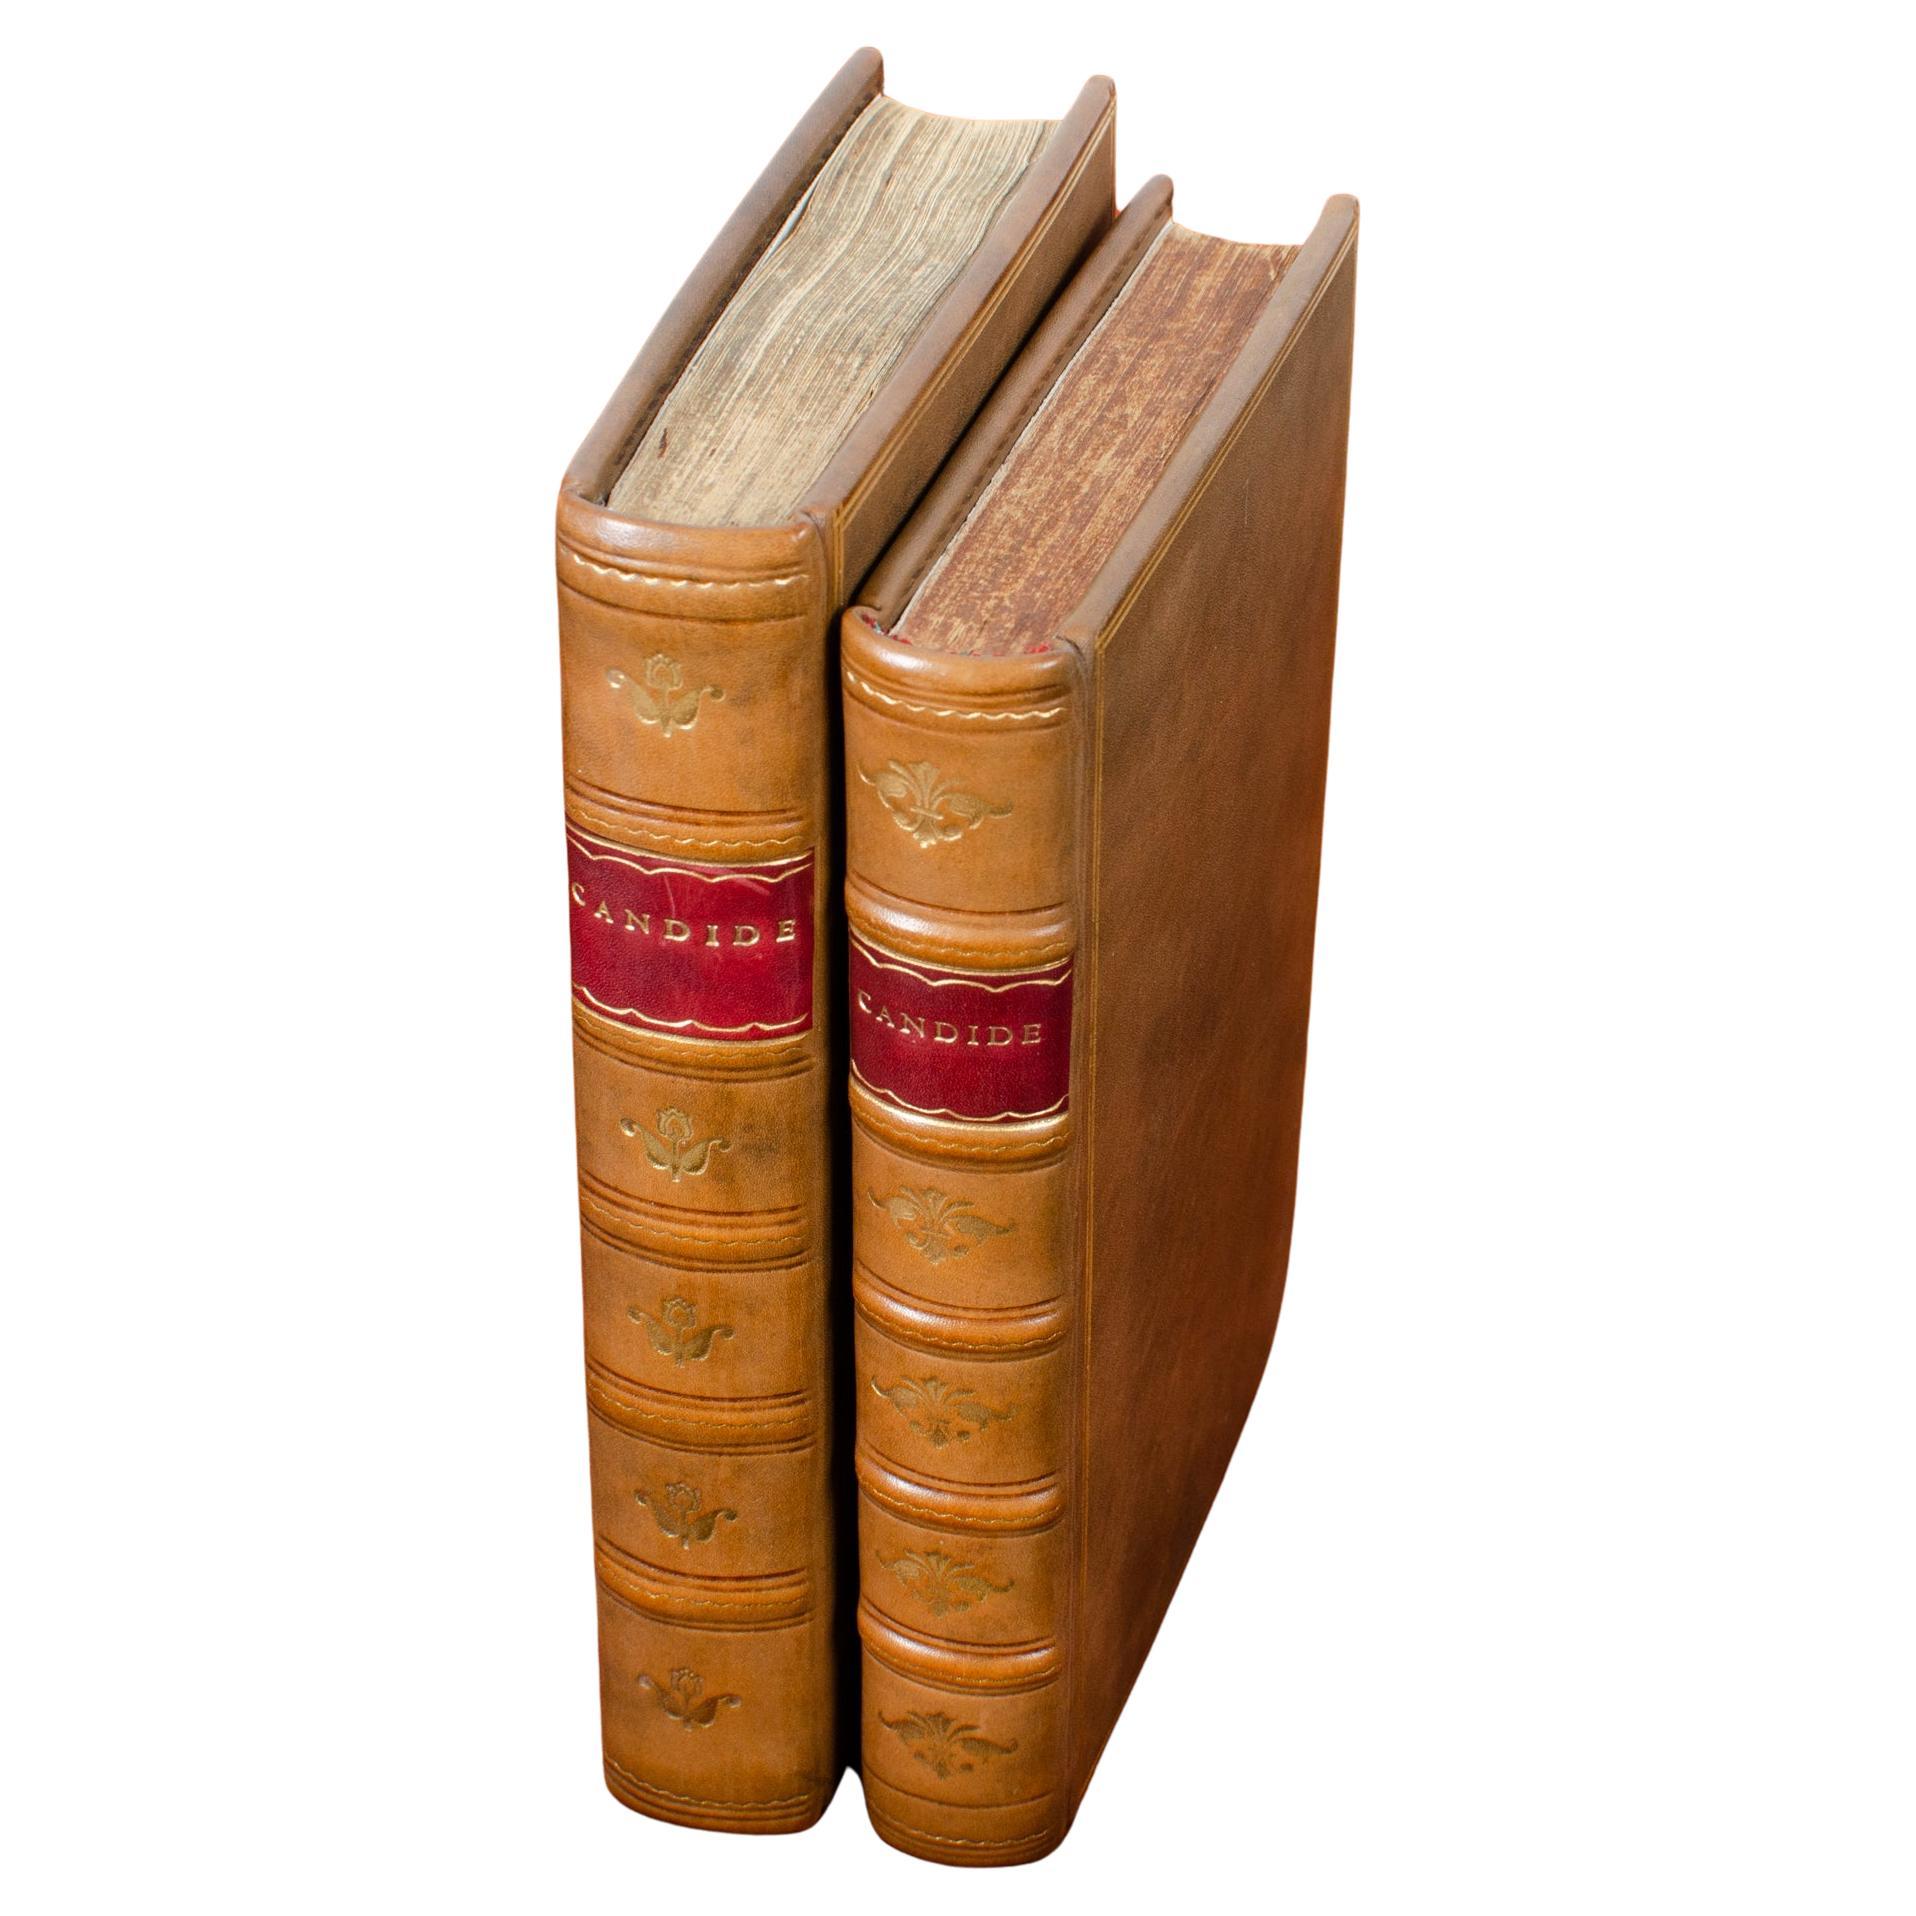 Voltaire's Candide True First Edition & First London Edition For Sale